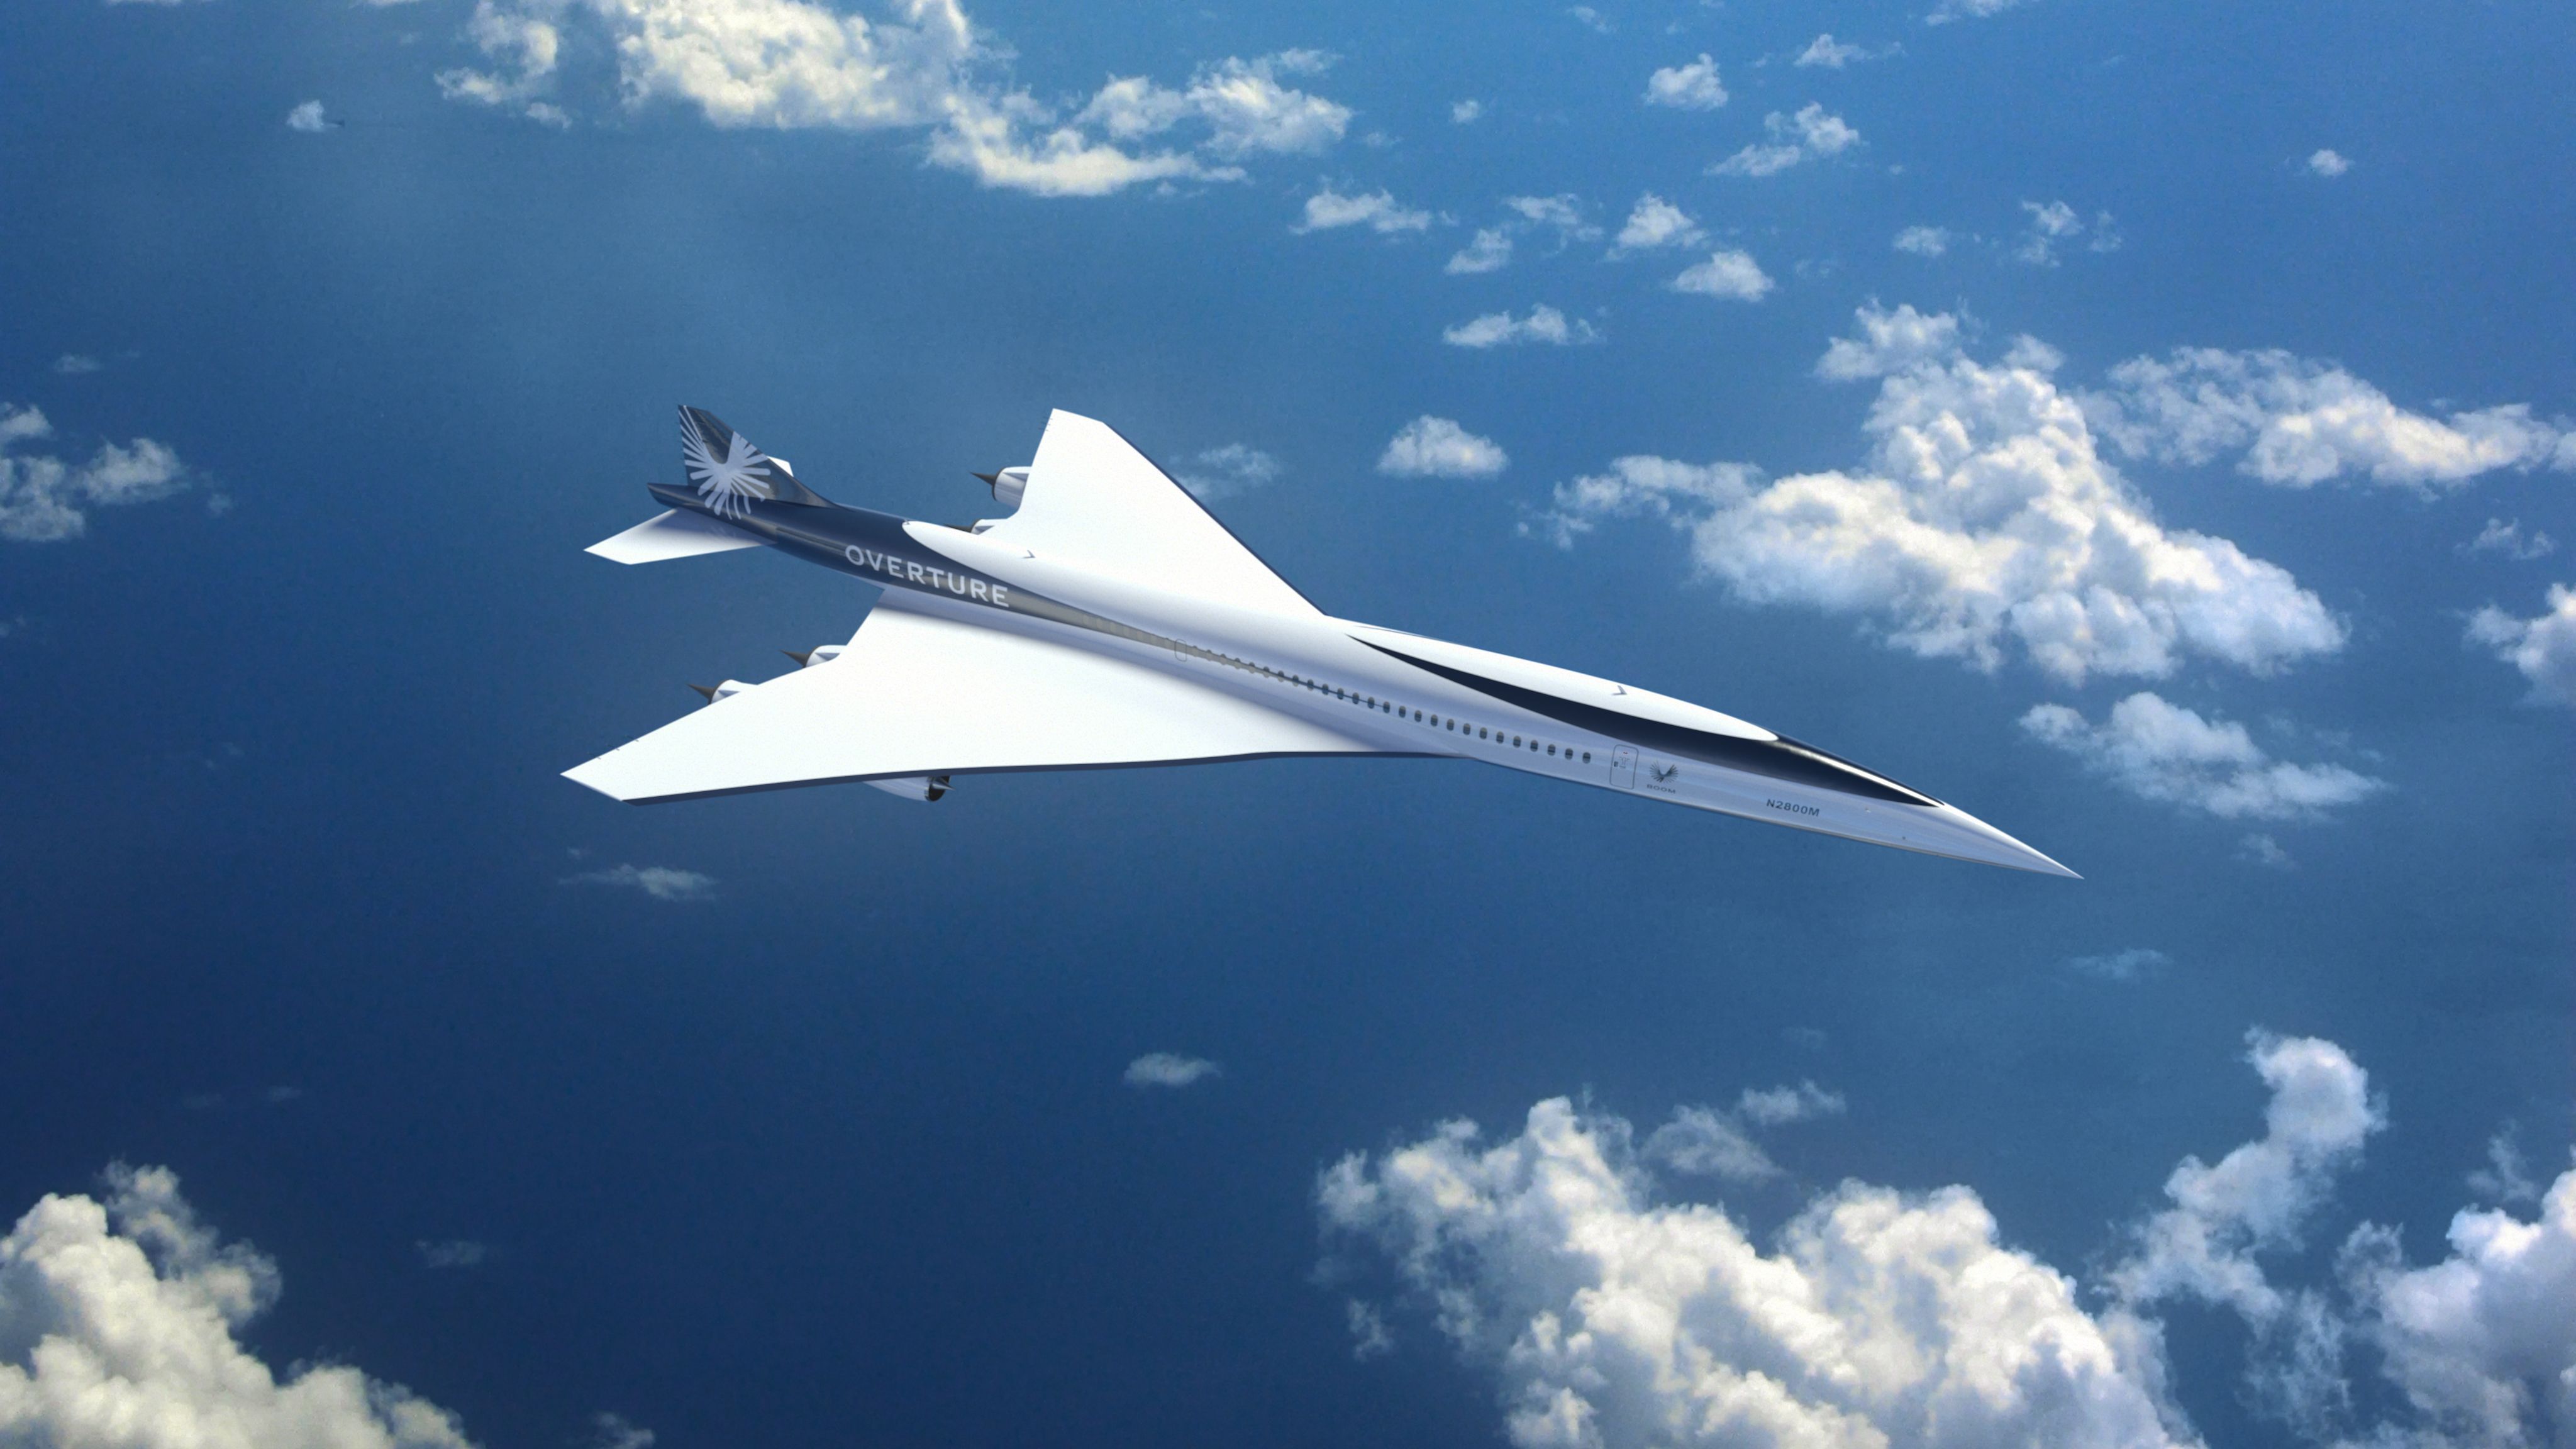 A render of Boom's Overture supersonic aircraft